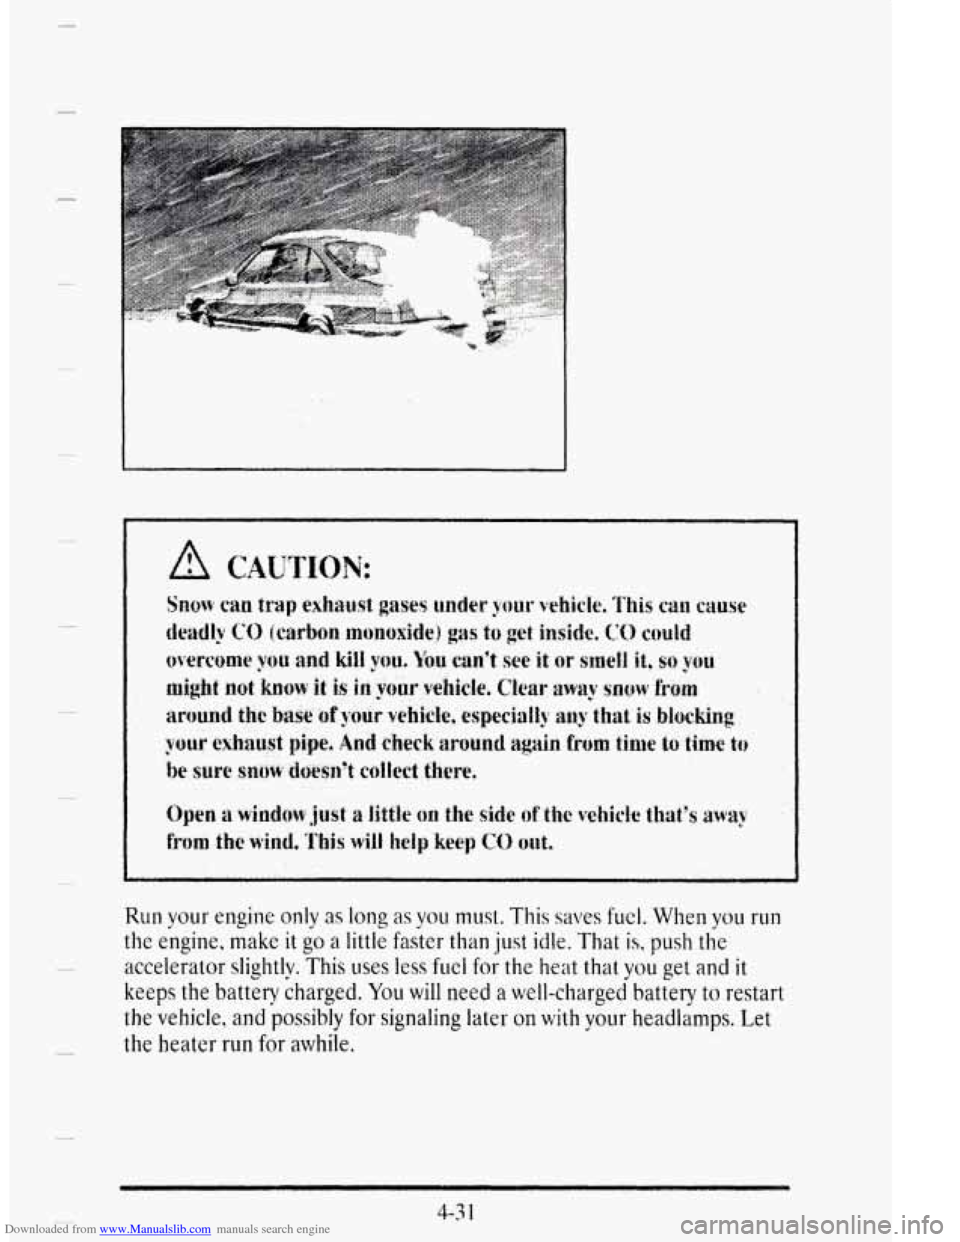 CADILLAC DEVILLE 1995 7.G Owners Manual Downloaded from www.Manualslib.com manuals search engine c 
. ... . . . . . , . . 
:. . . 
Run your engine only as long as you must. This saves fuel. When vou run 
the engine, make it go a little  fas